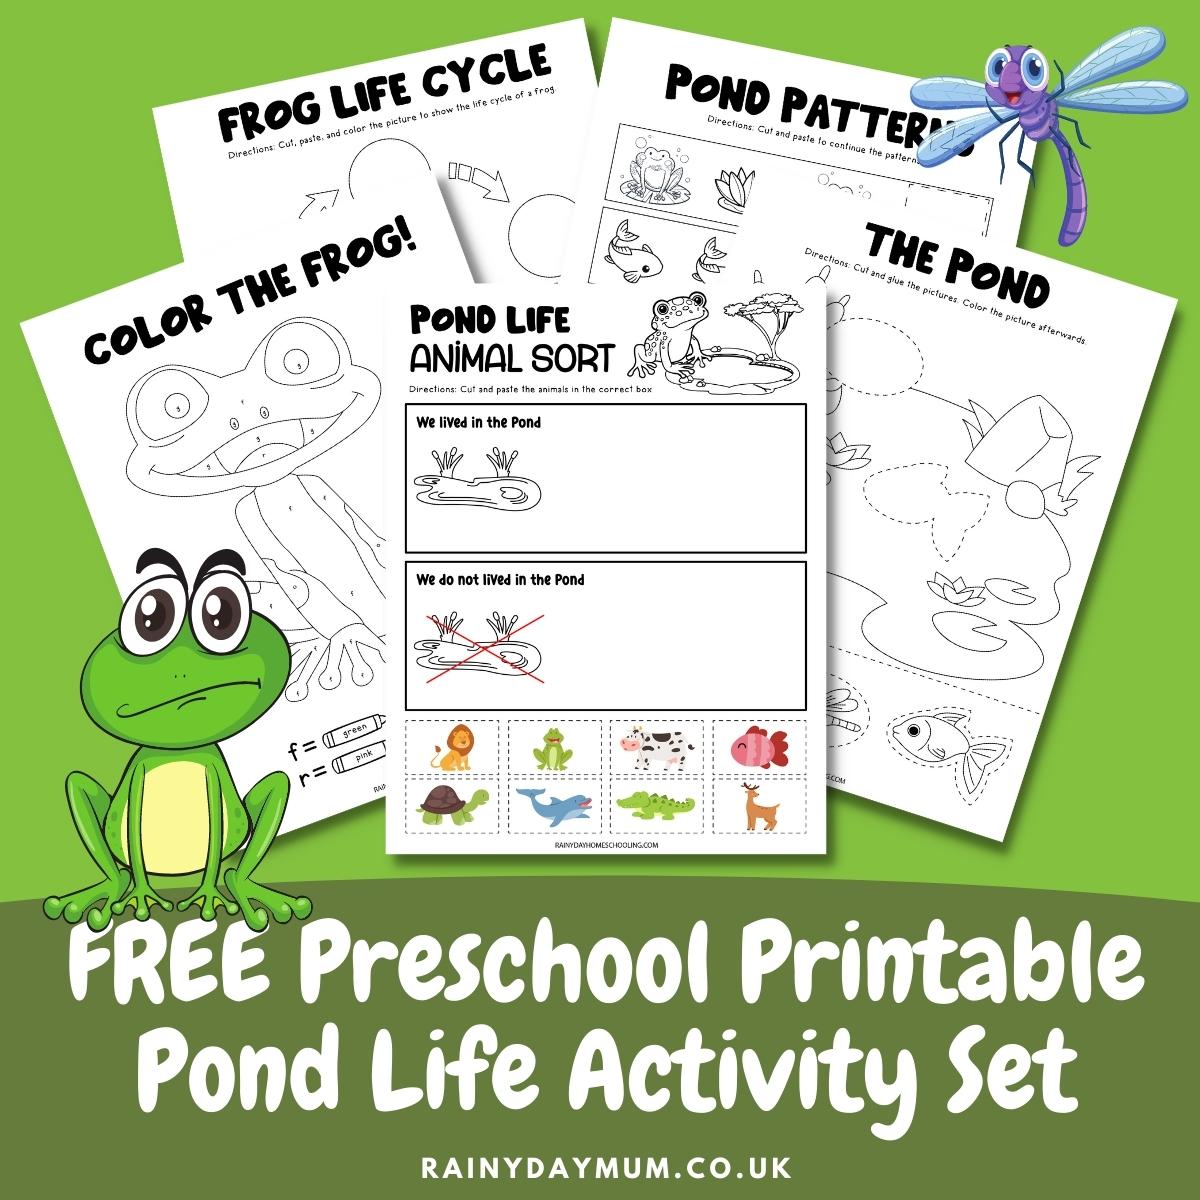 FREE Preschool Printable Pond Life Activity Set Sample Pages for promotion